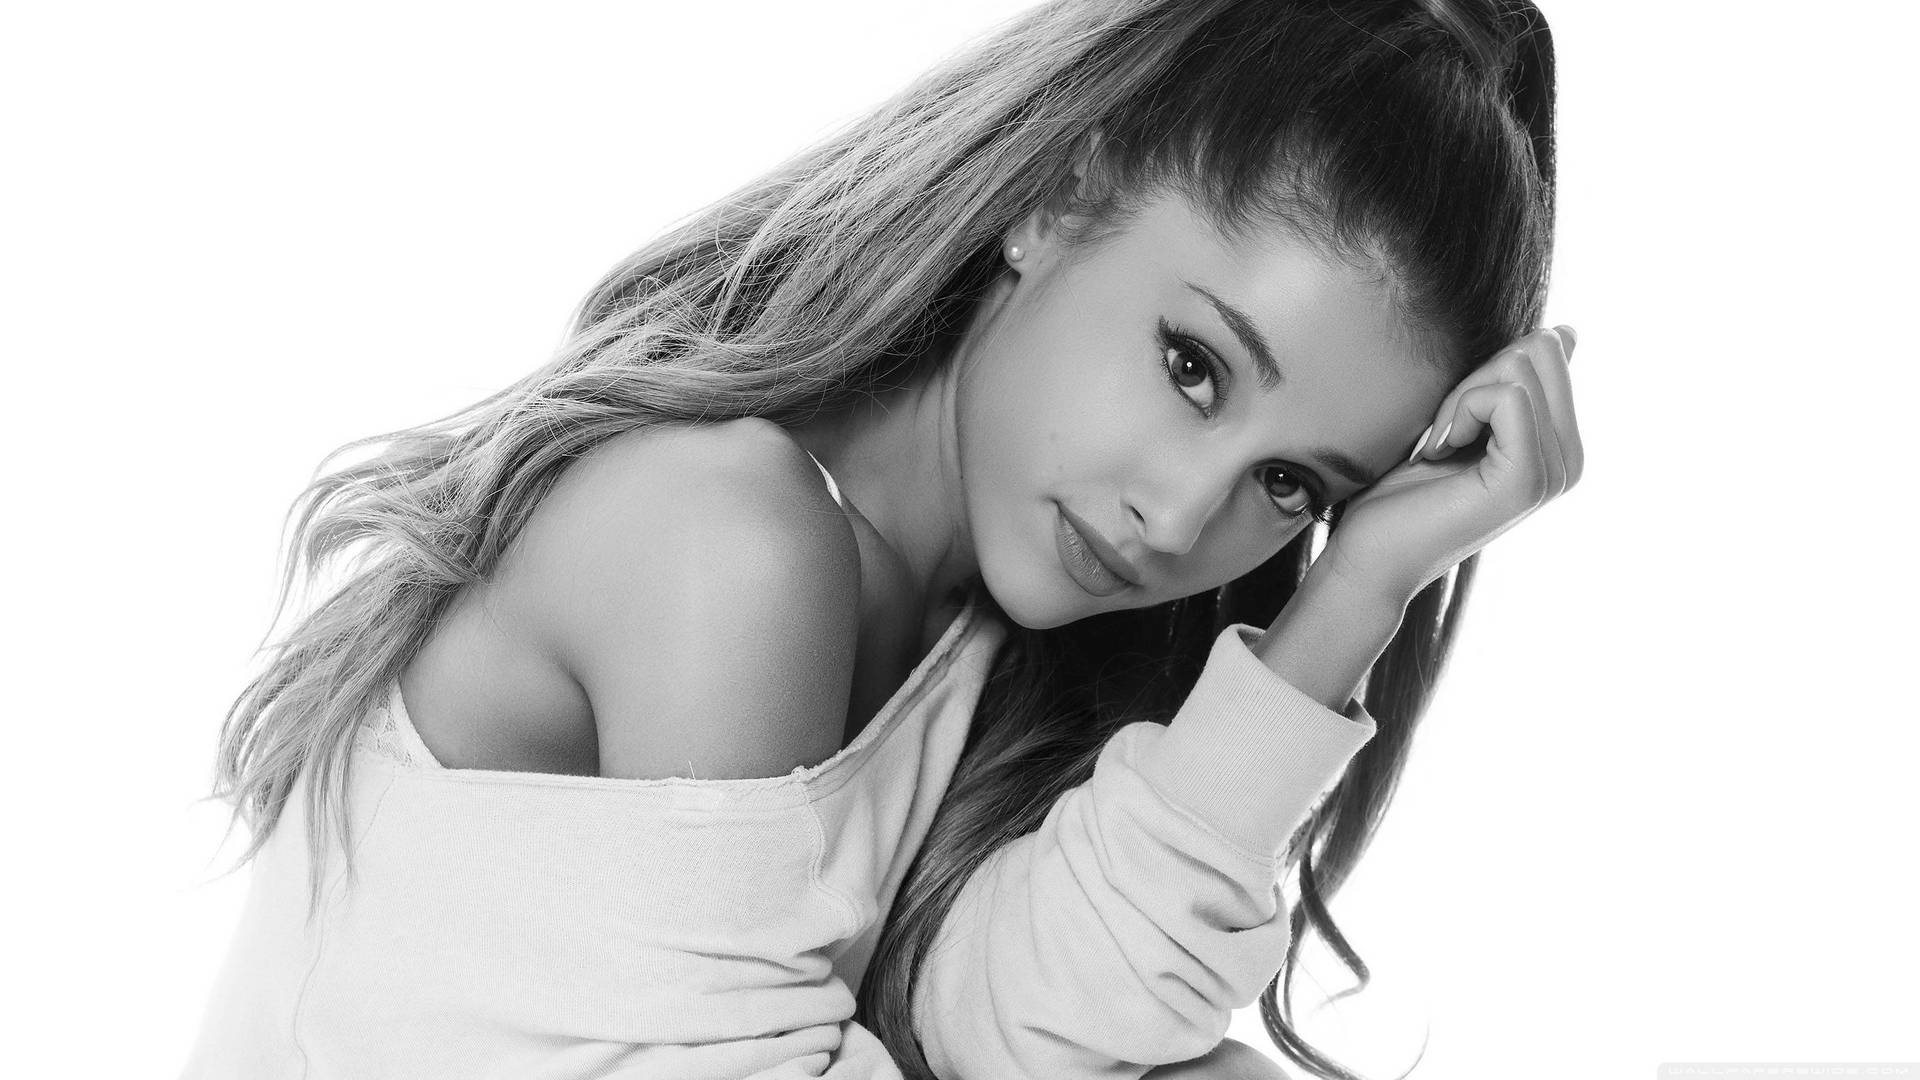 Ariana Grande looking as gorgeous as ever Wallpaper